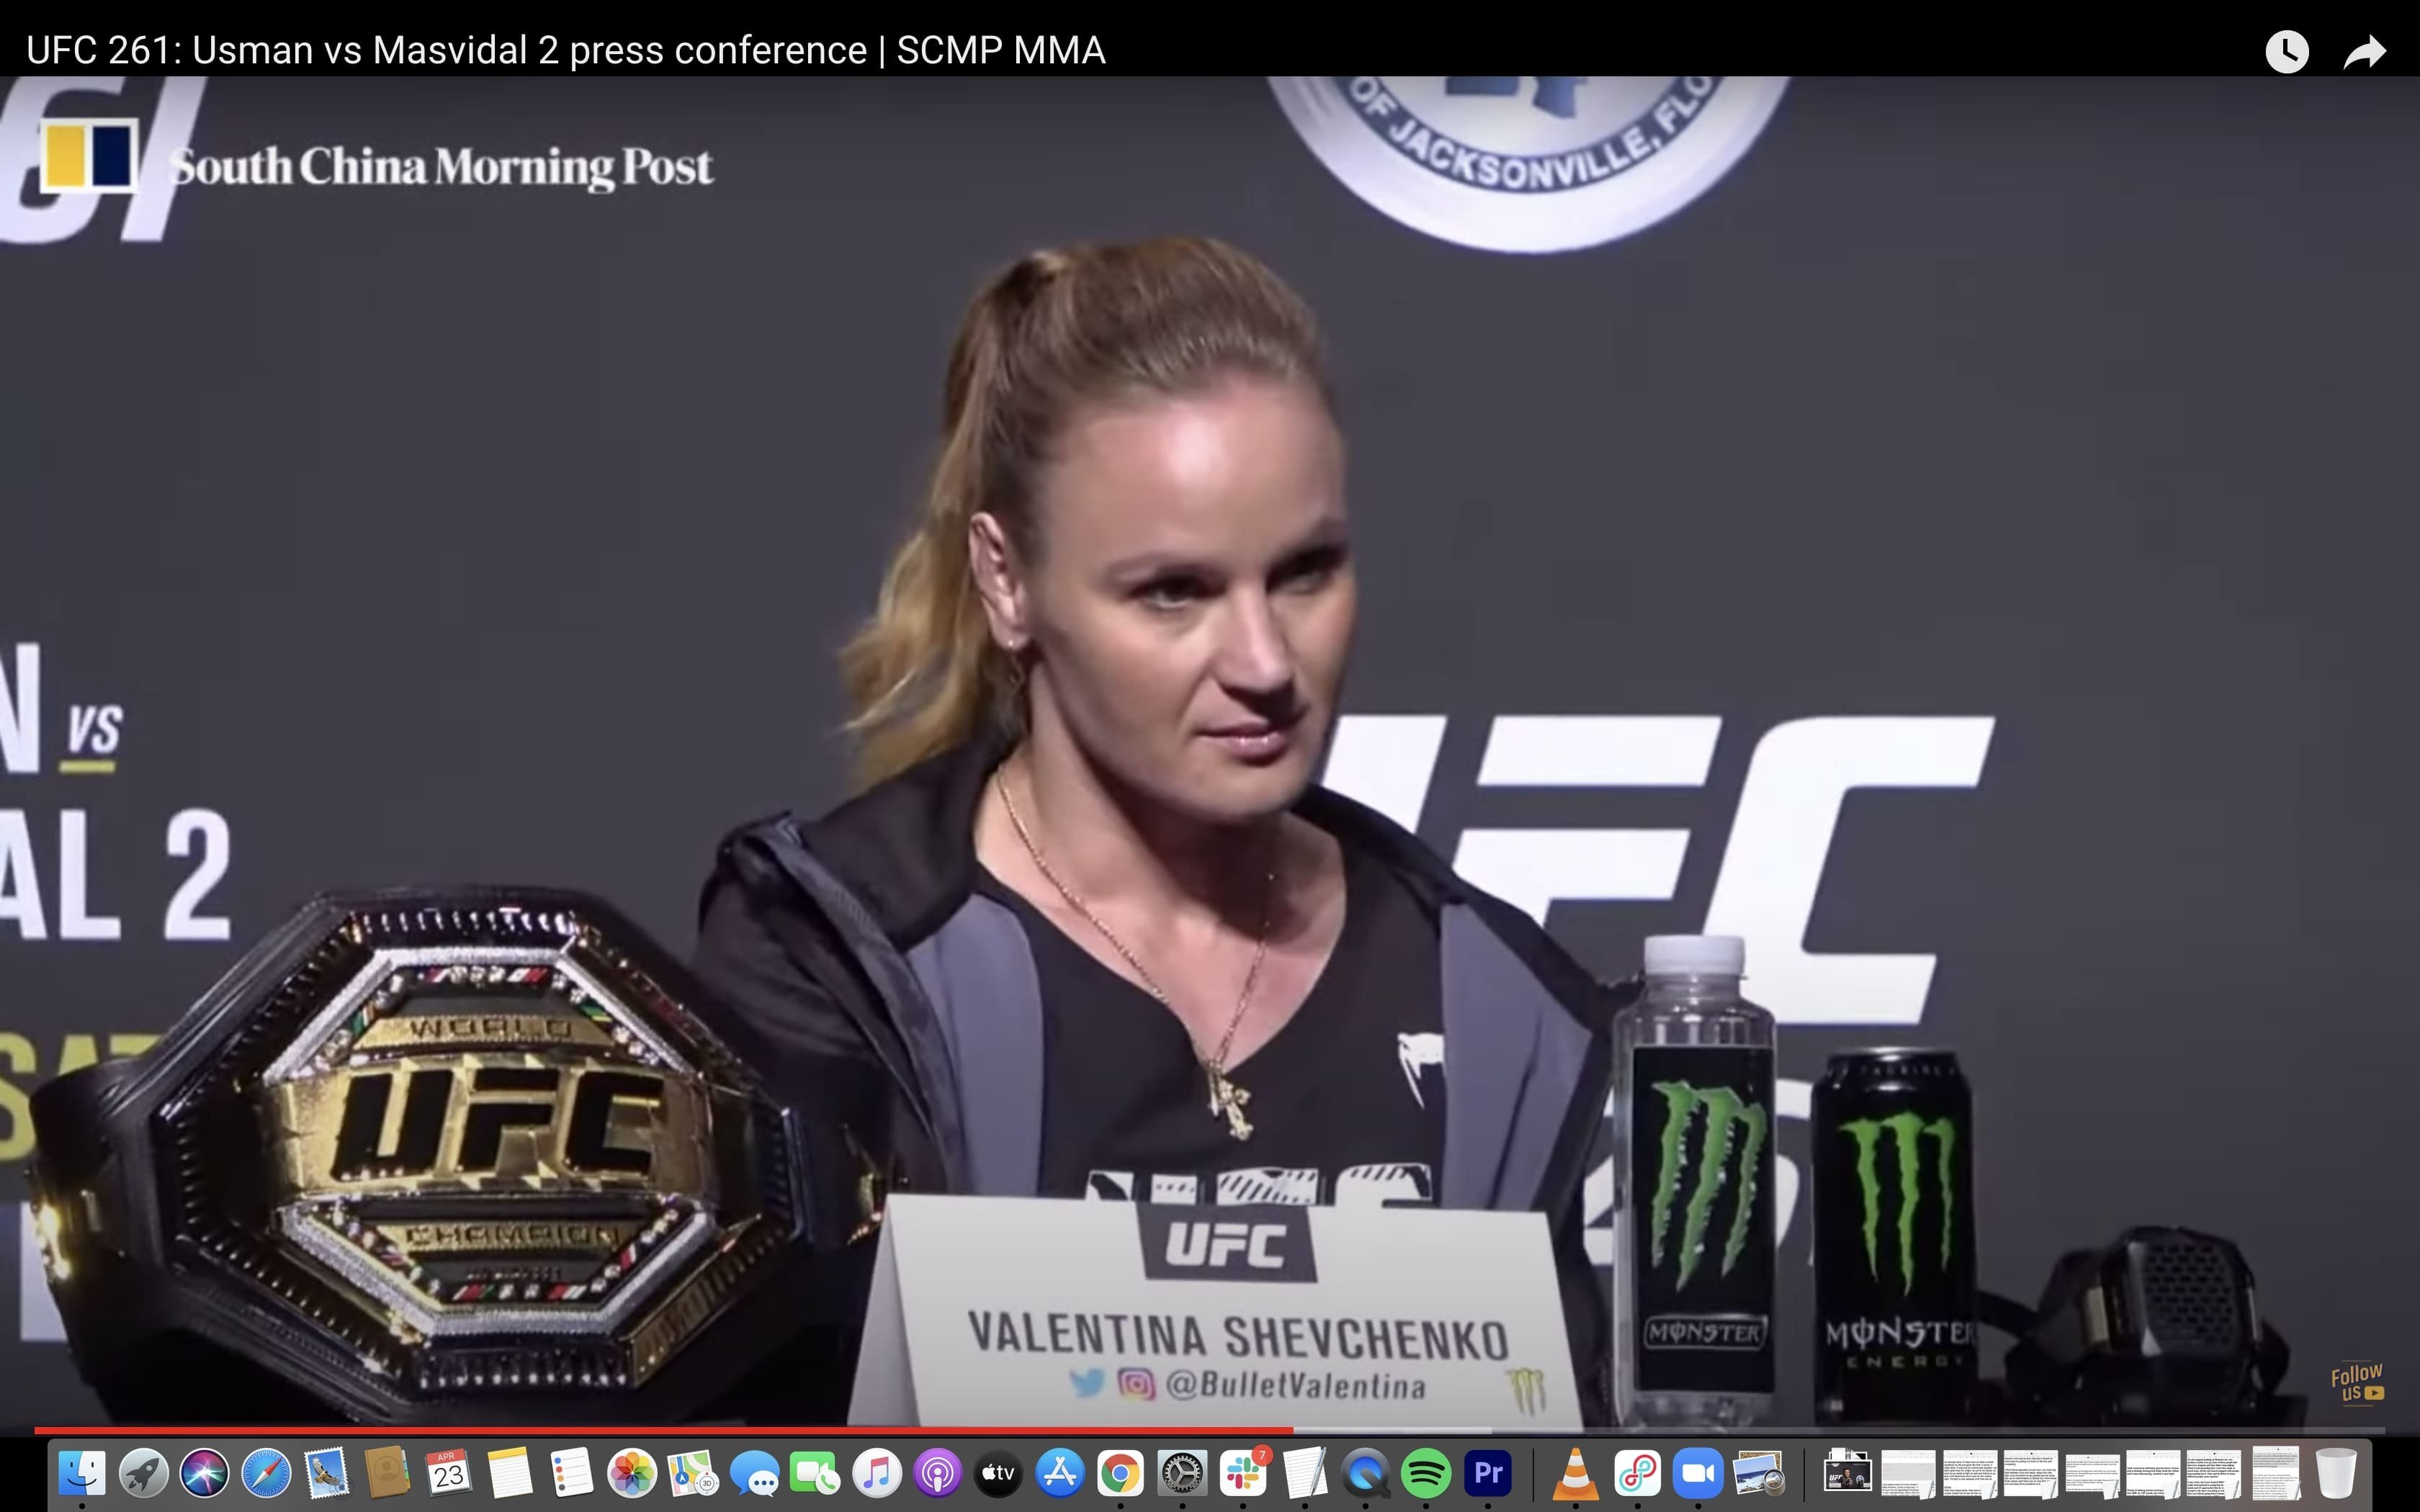 Valentina Shevchenko speaks to the media at the UFC 261 press conference in Jacksonville, Florida. Photo: Drake Riggs